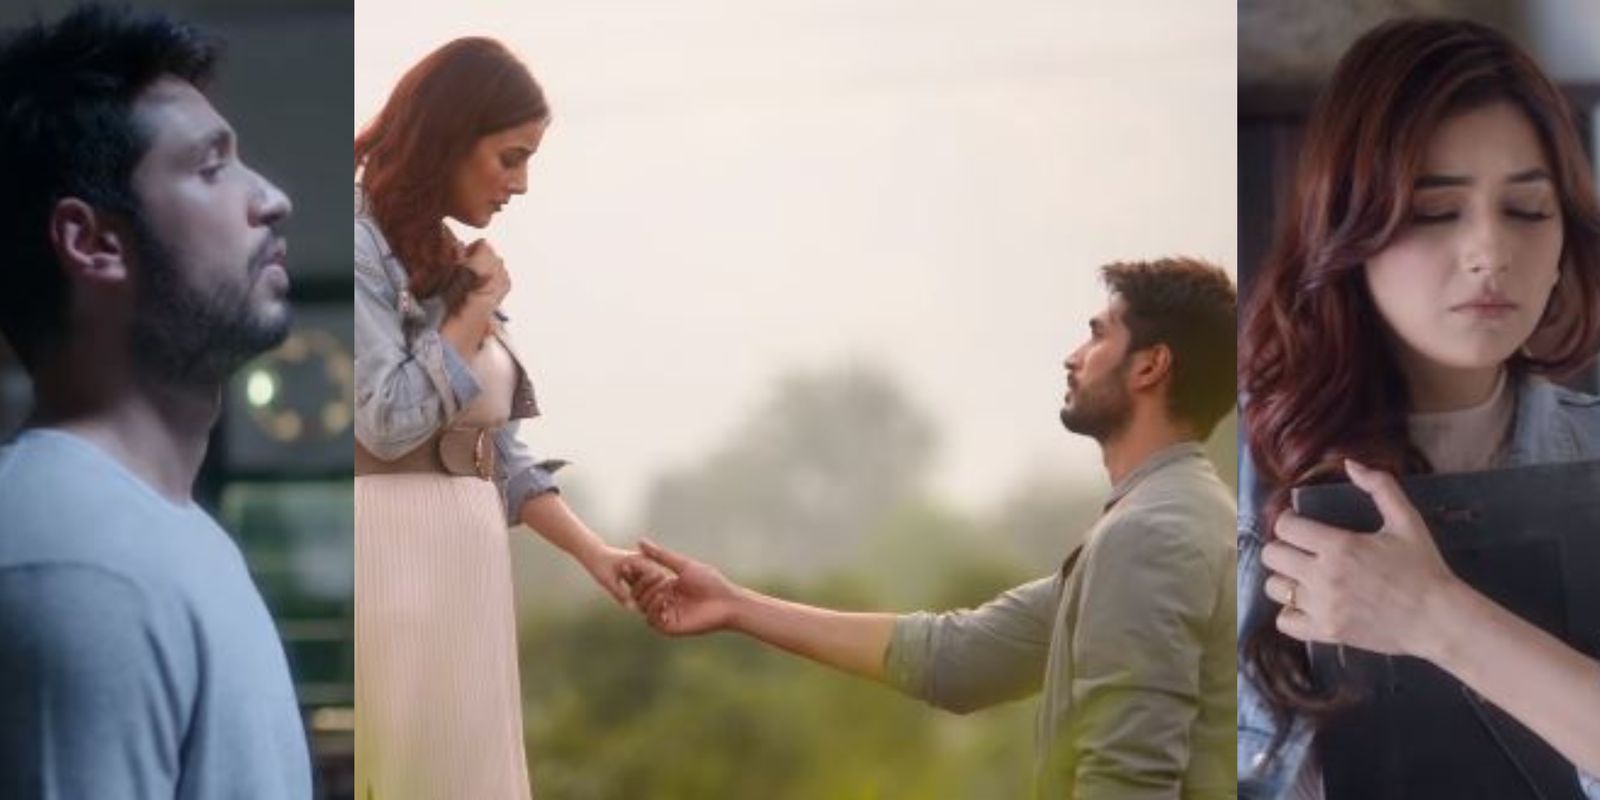 Wada Hai Song: Shehnaaz Gill And Arjun Kanungo Nail This Soft Romantic Track With Their Chemistry Backed By Great Music